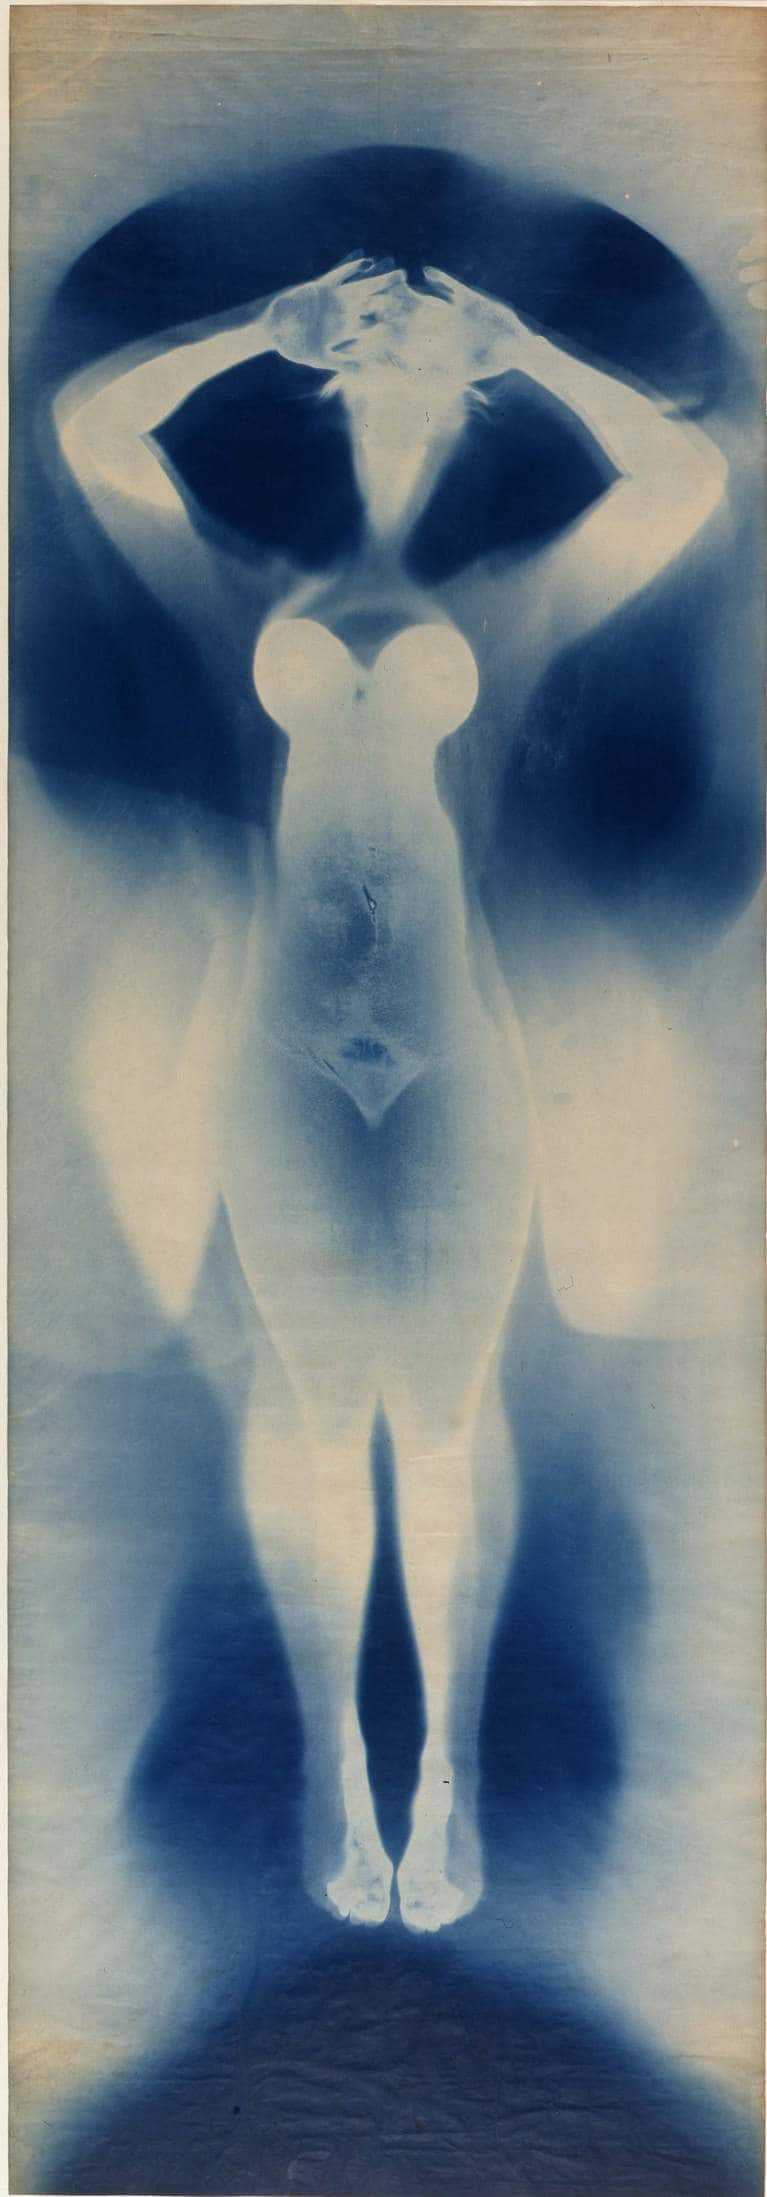 A scan of a naked woman's body in blue and white